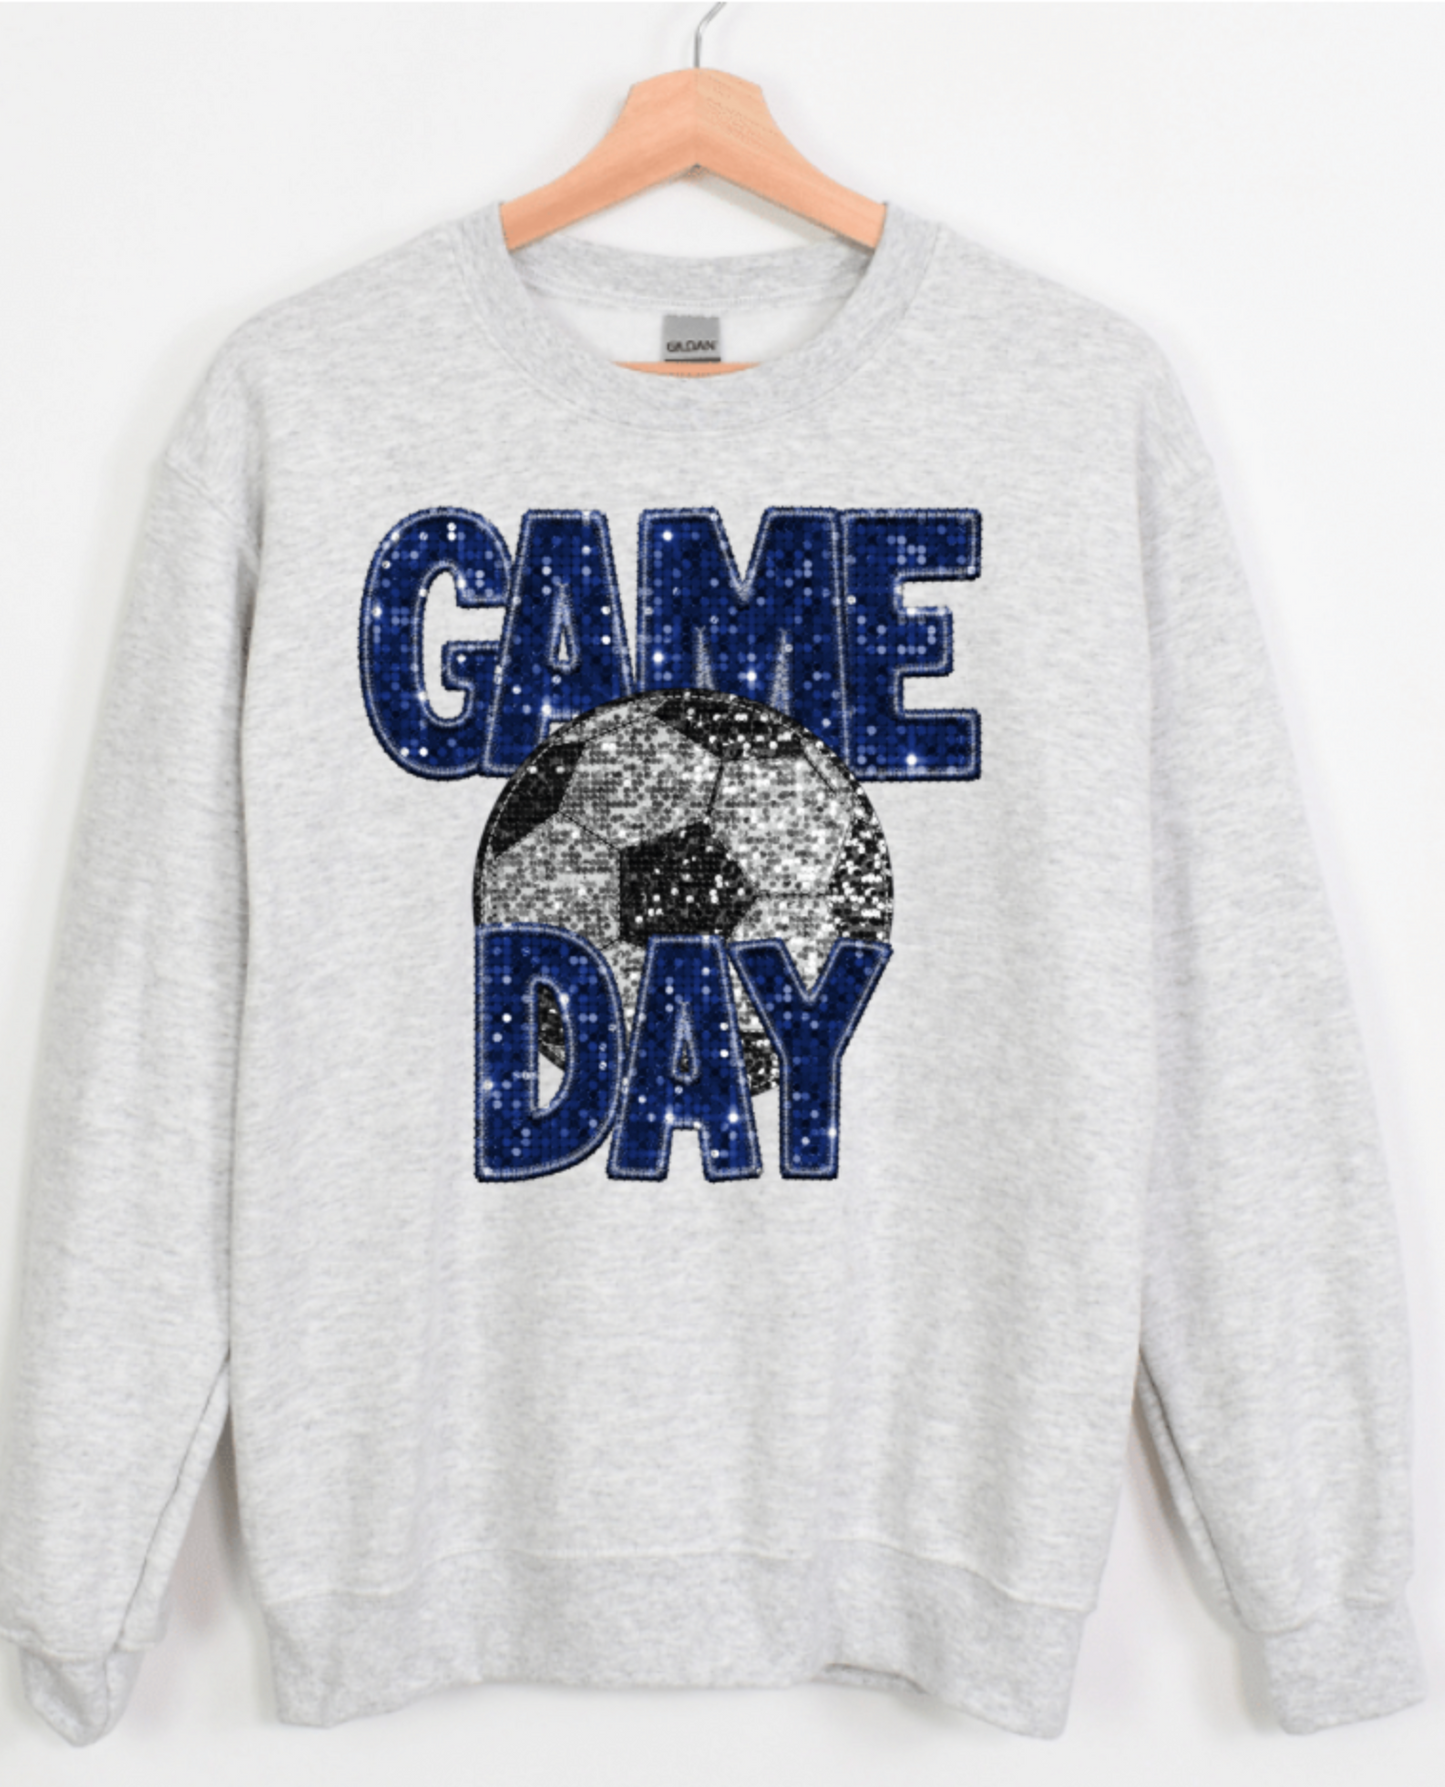 GAME DAY FAUX GLITTER SEQUIN SOCCER (ROYAL BLUE GAME DAY)